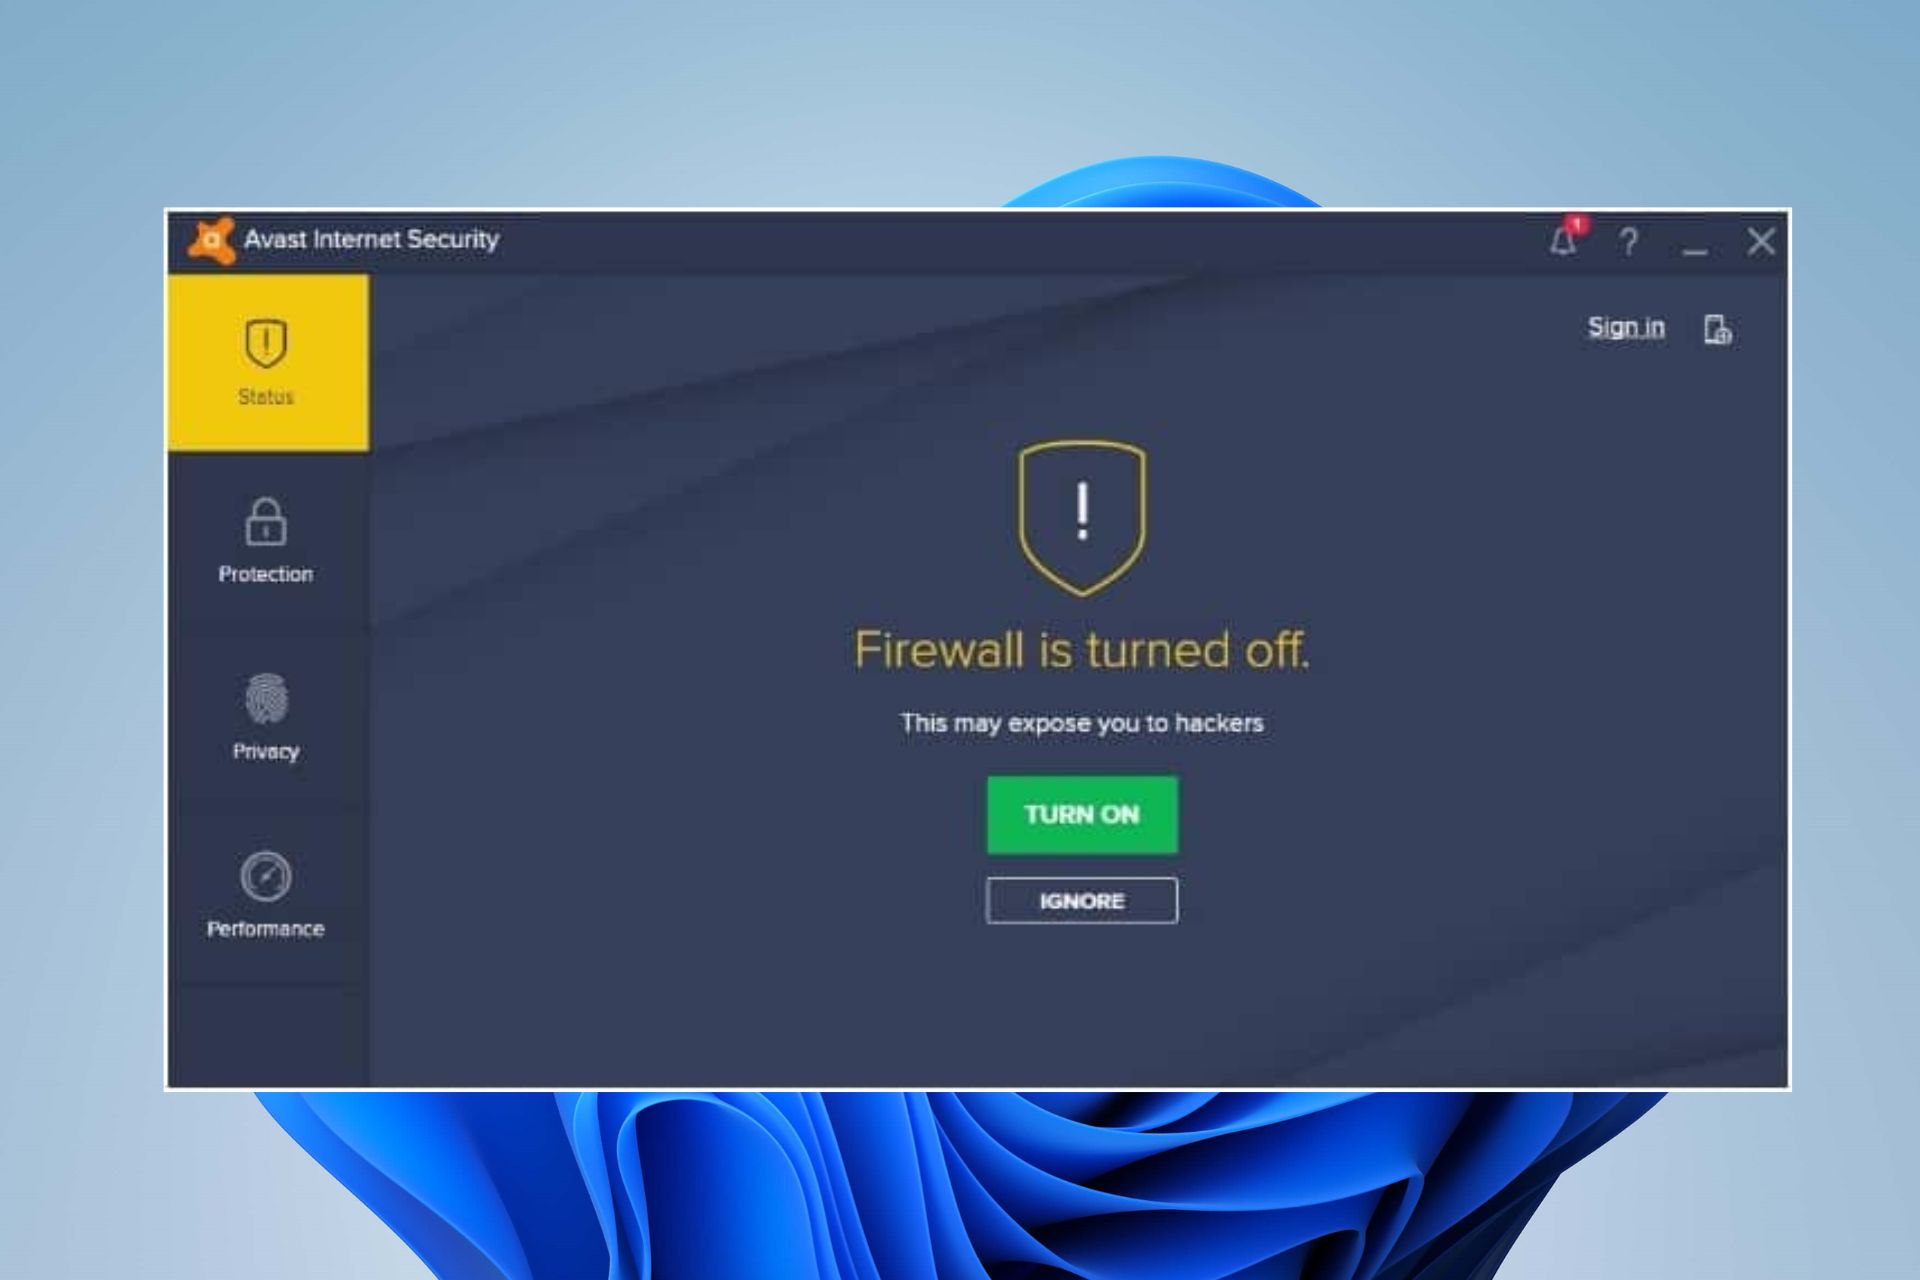 Can't Turn on The Firewall in Avast: 5 Ways to Fix It